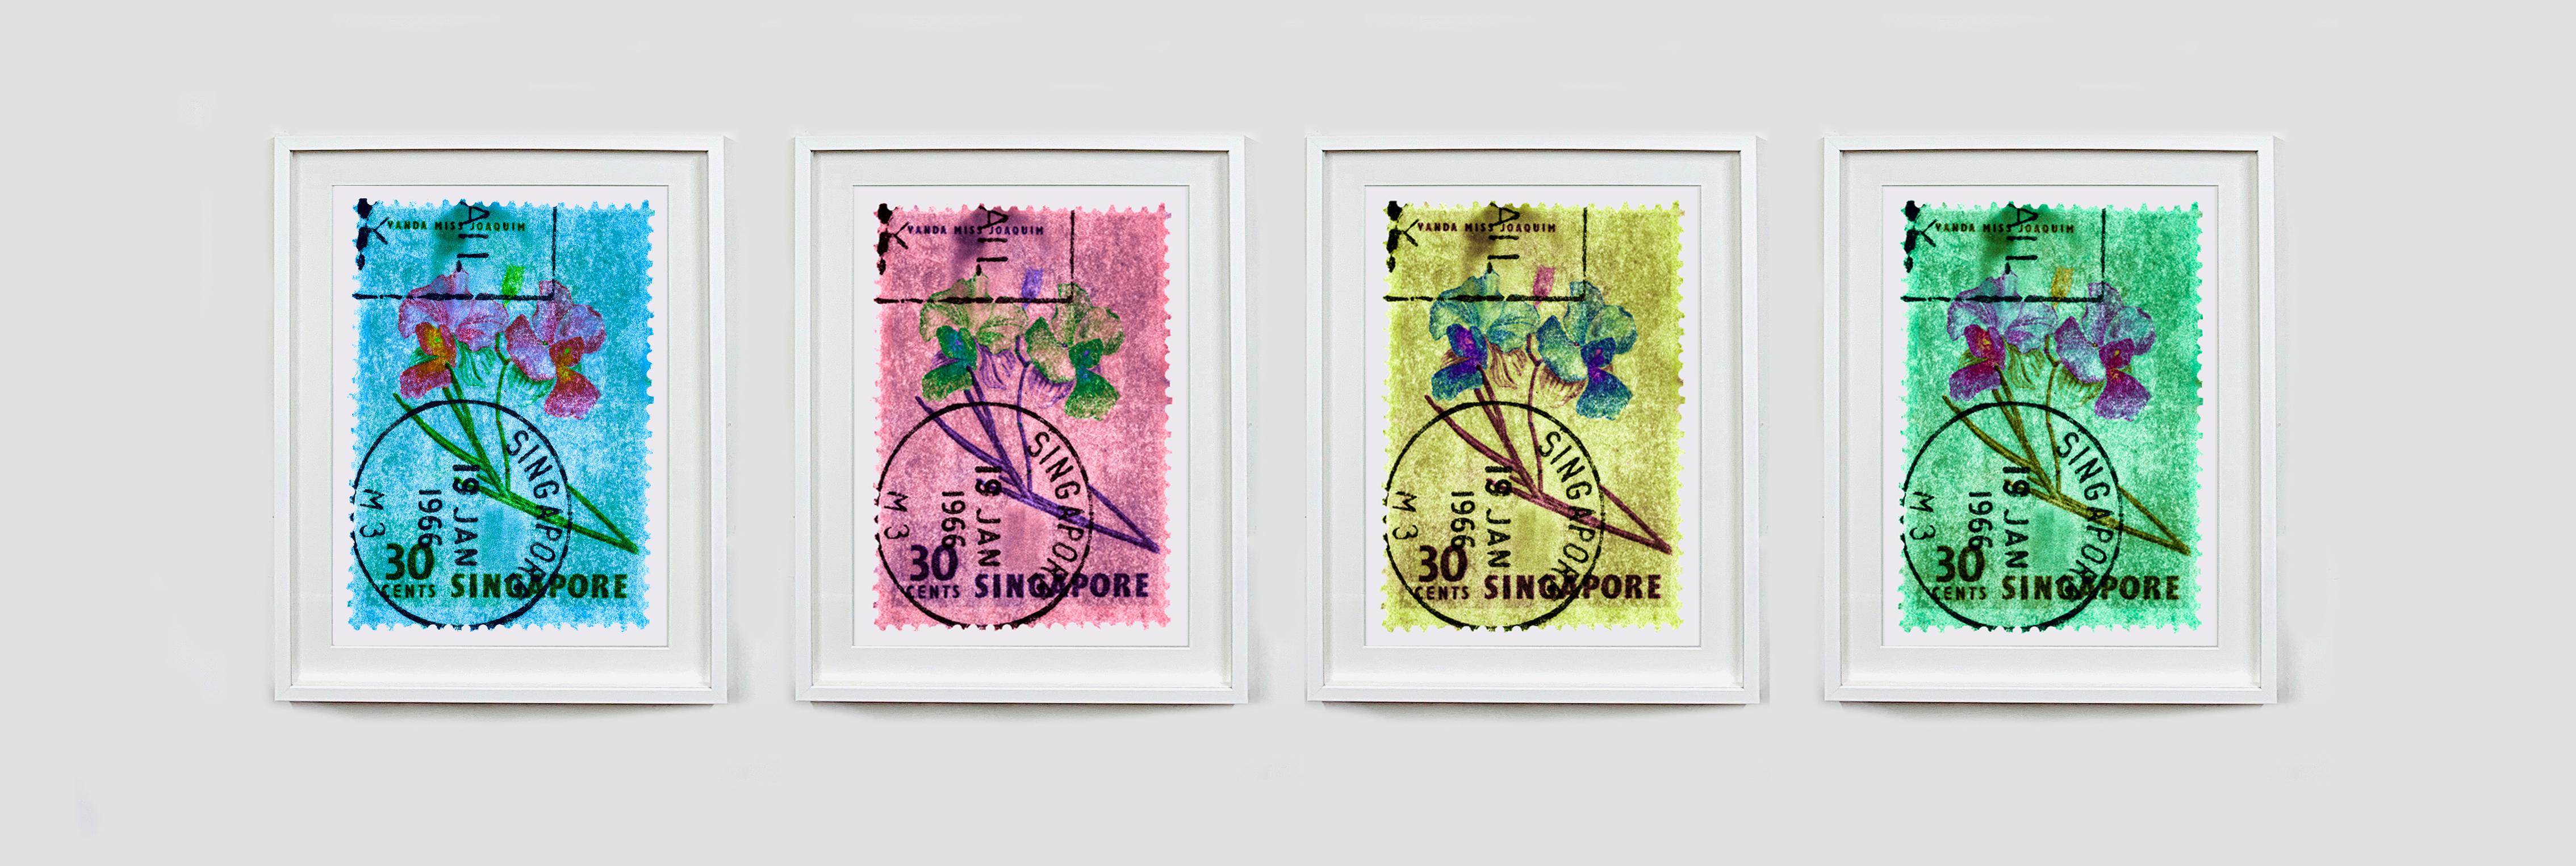 Singapore Stamp Collection, 30c Singapore Orchid Green - Floral color photo For Sale 2